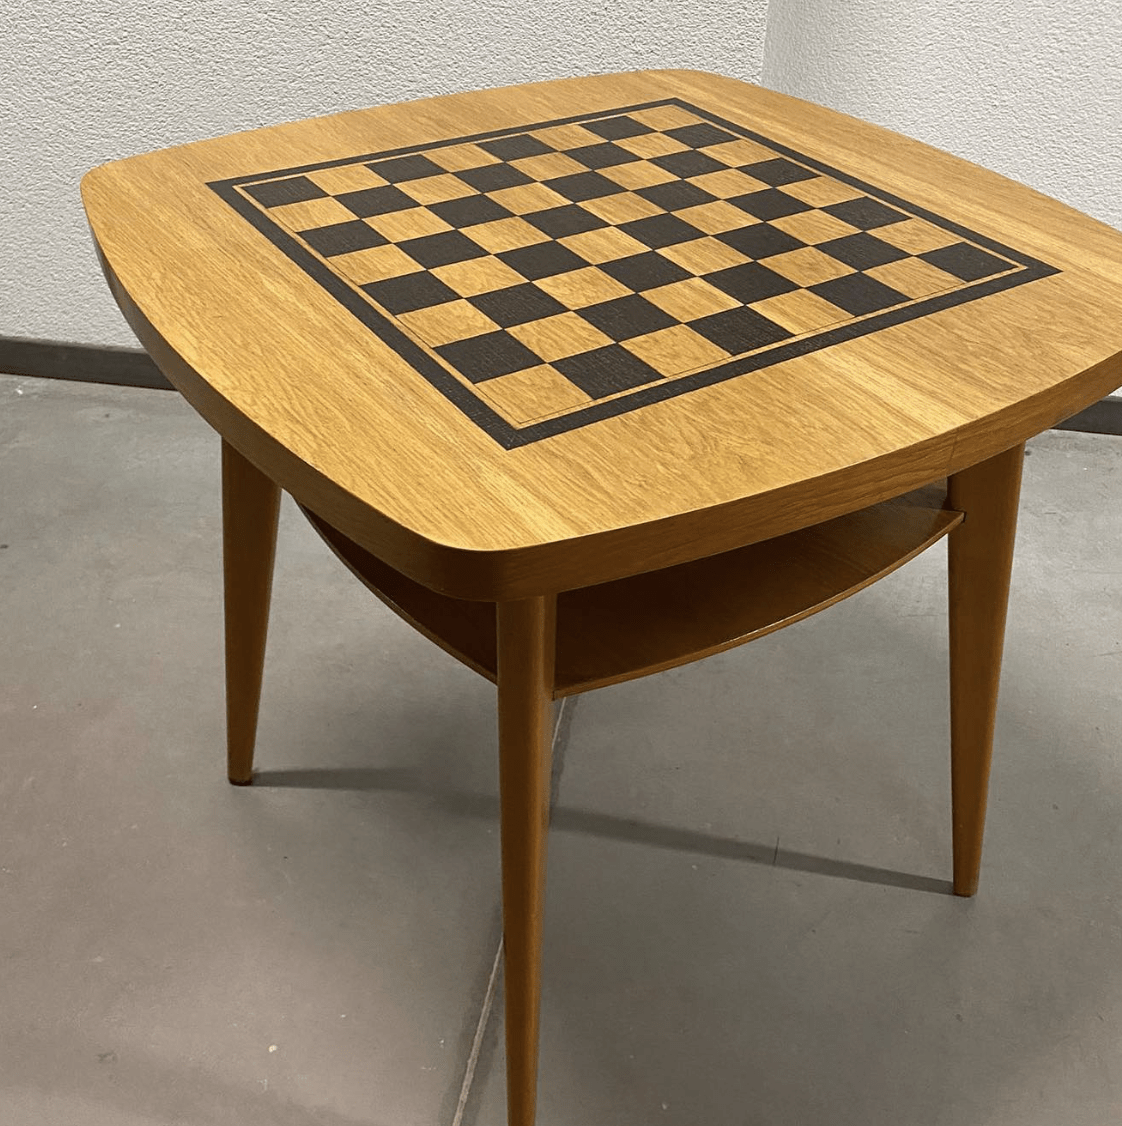 wood burnt chess board on table